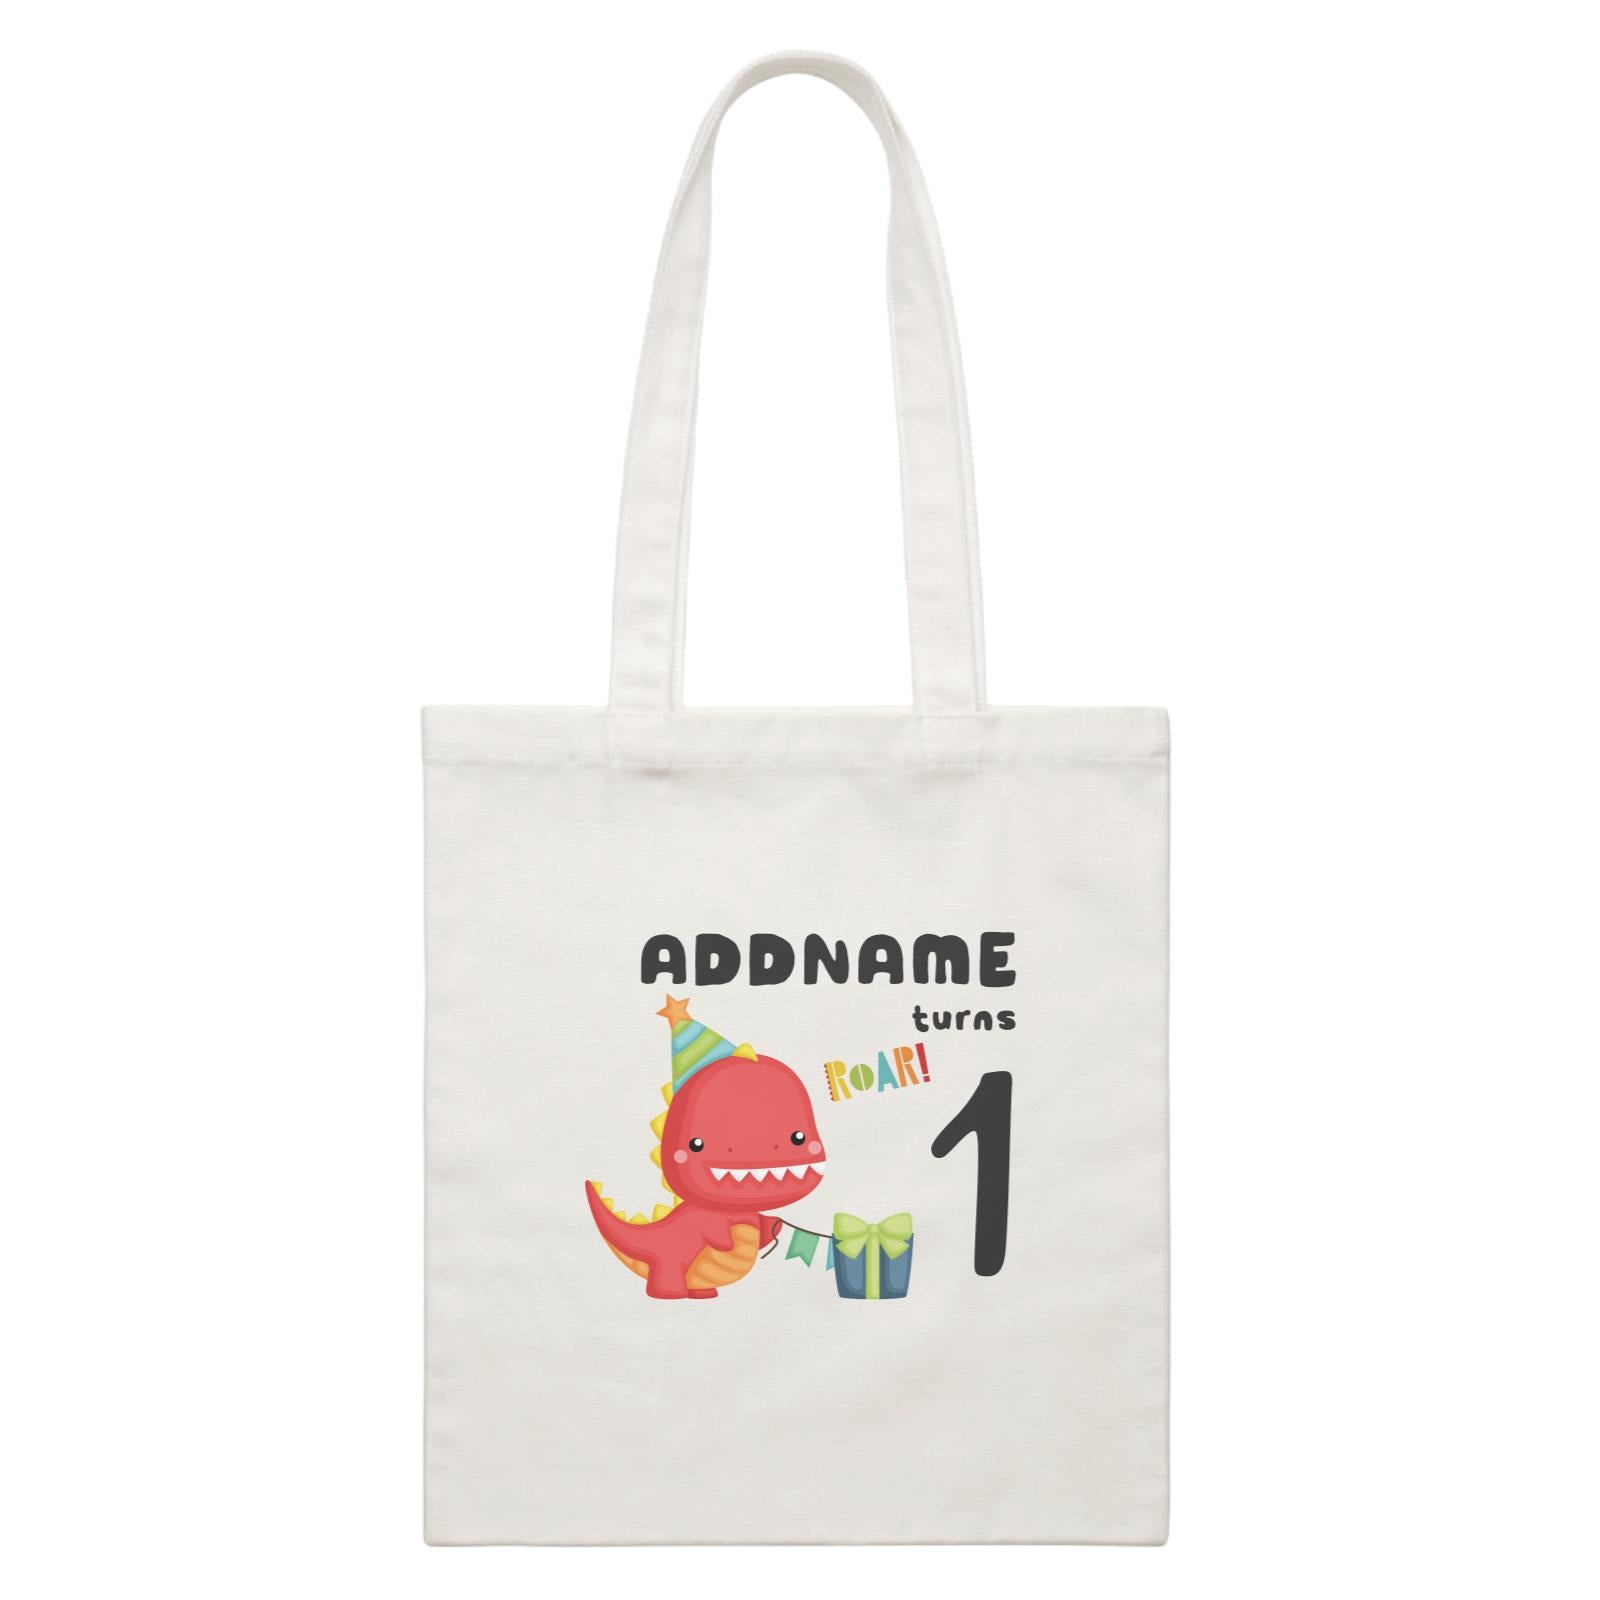 Birthday Dinosaur Happy Red Rex Wearing Party Hat Addname Turns 1 White Canvas Bag